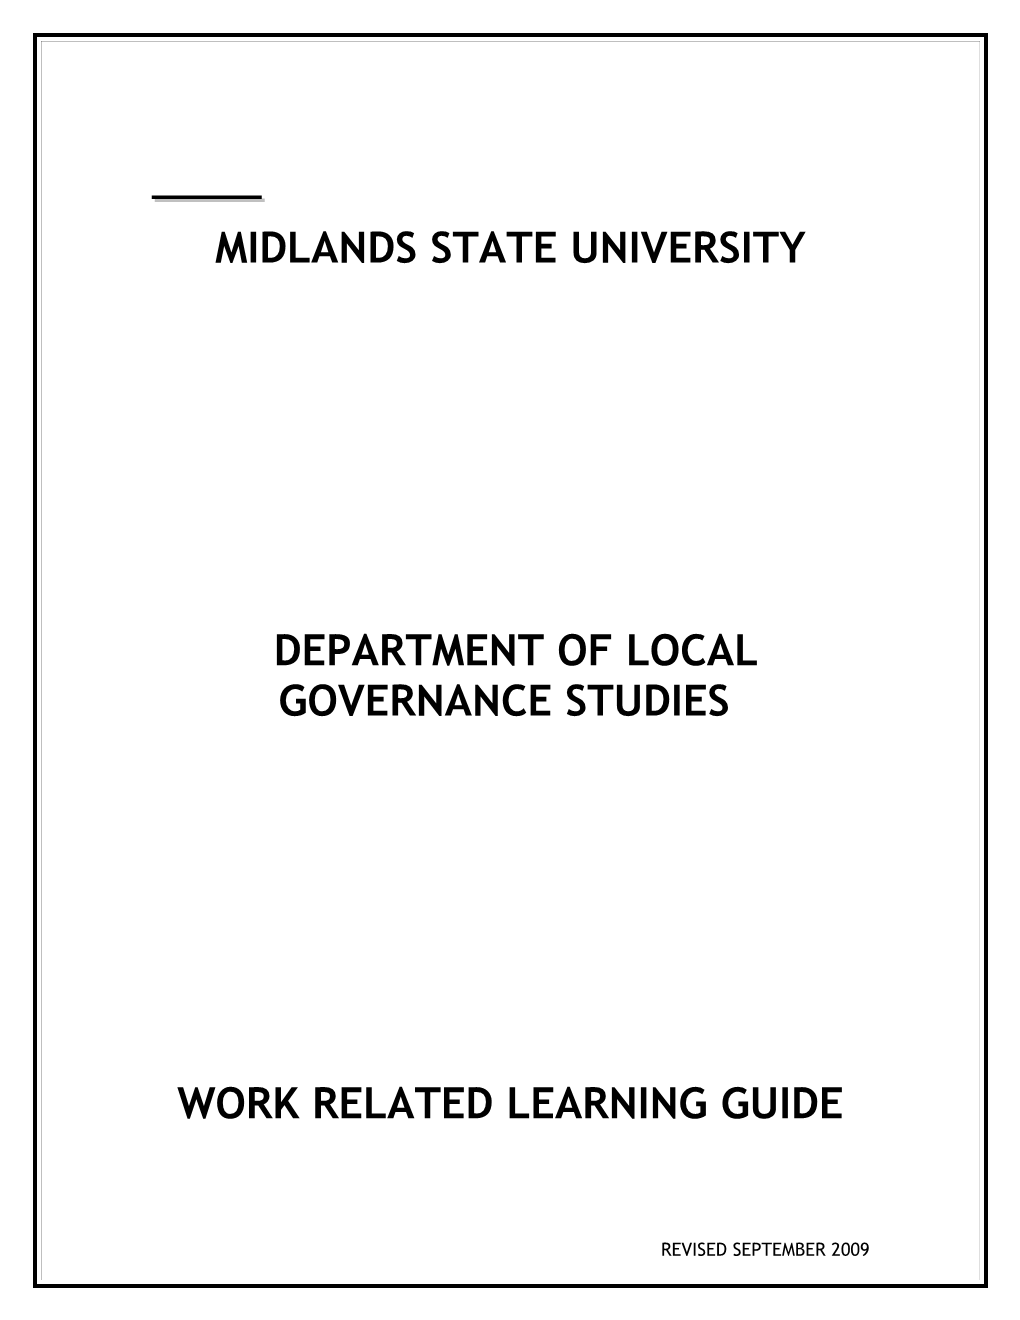 Work- Related Learning Guide